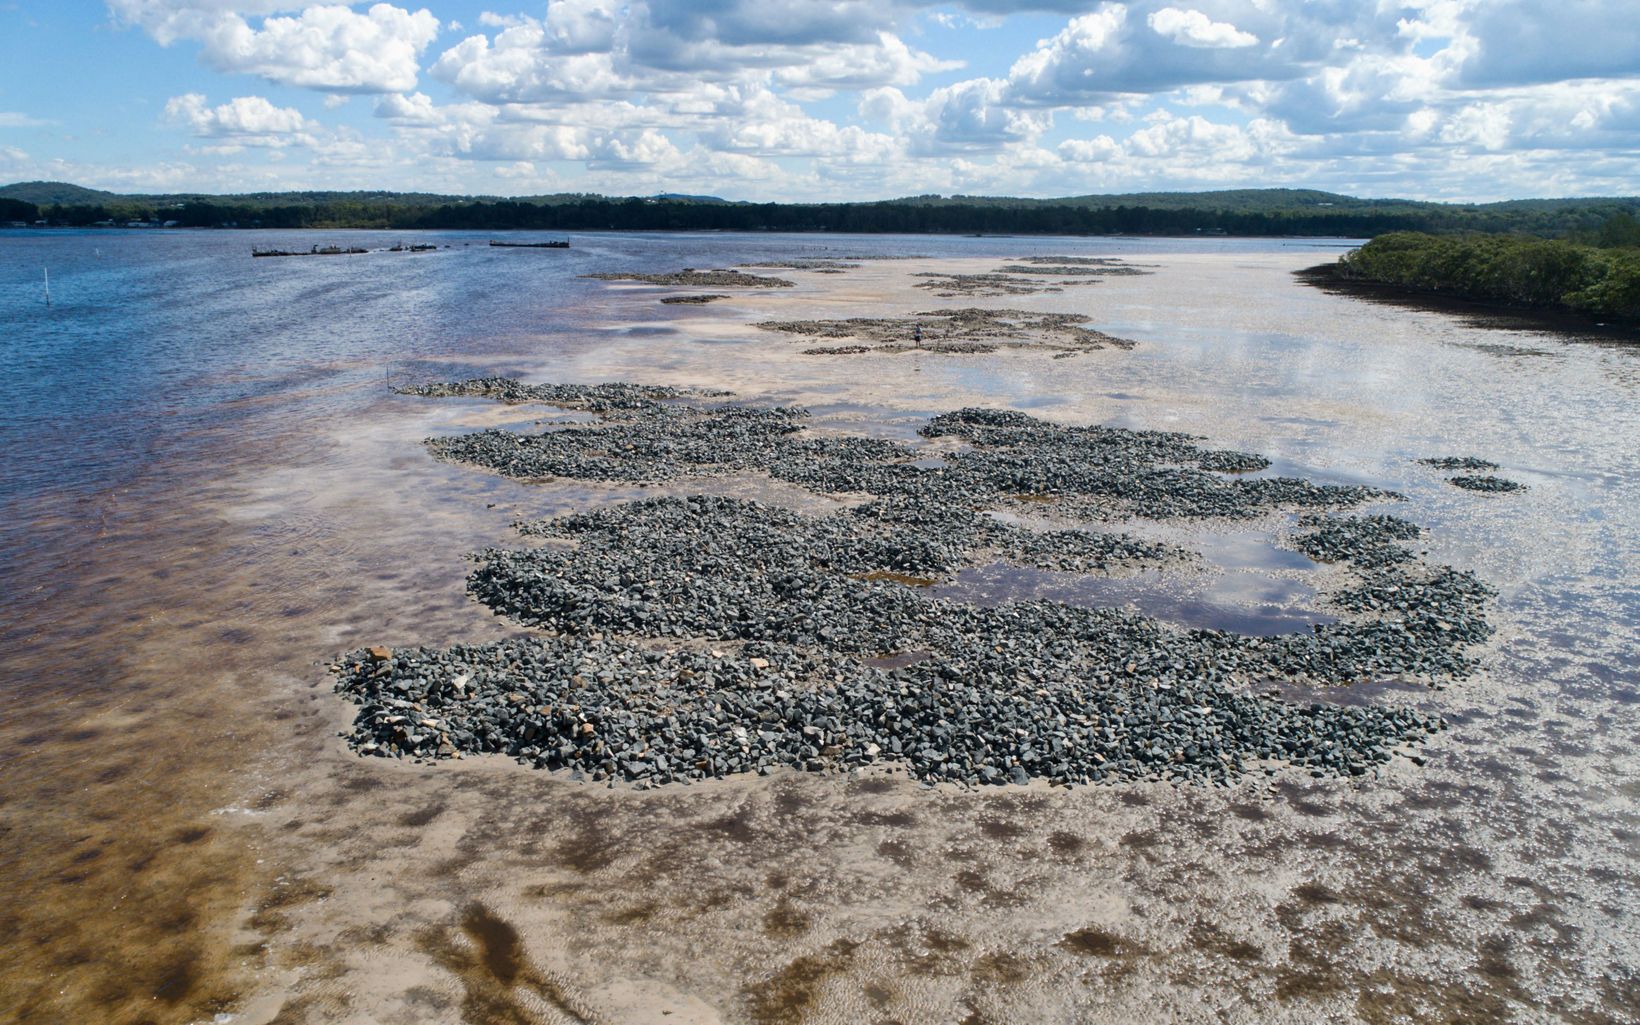 Intertidal shellfish reef  Intertidal shellfish reef bases at the Myall River mouth © Kirk Dahle